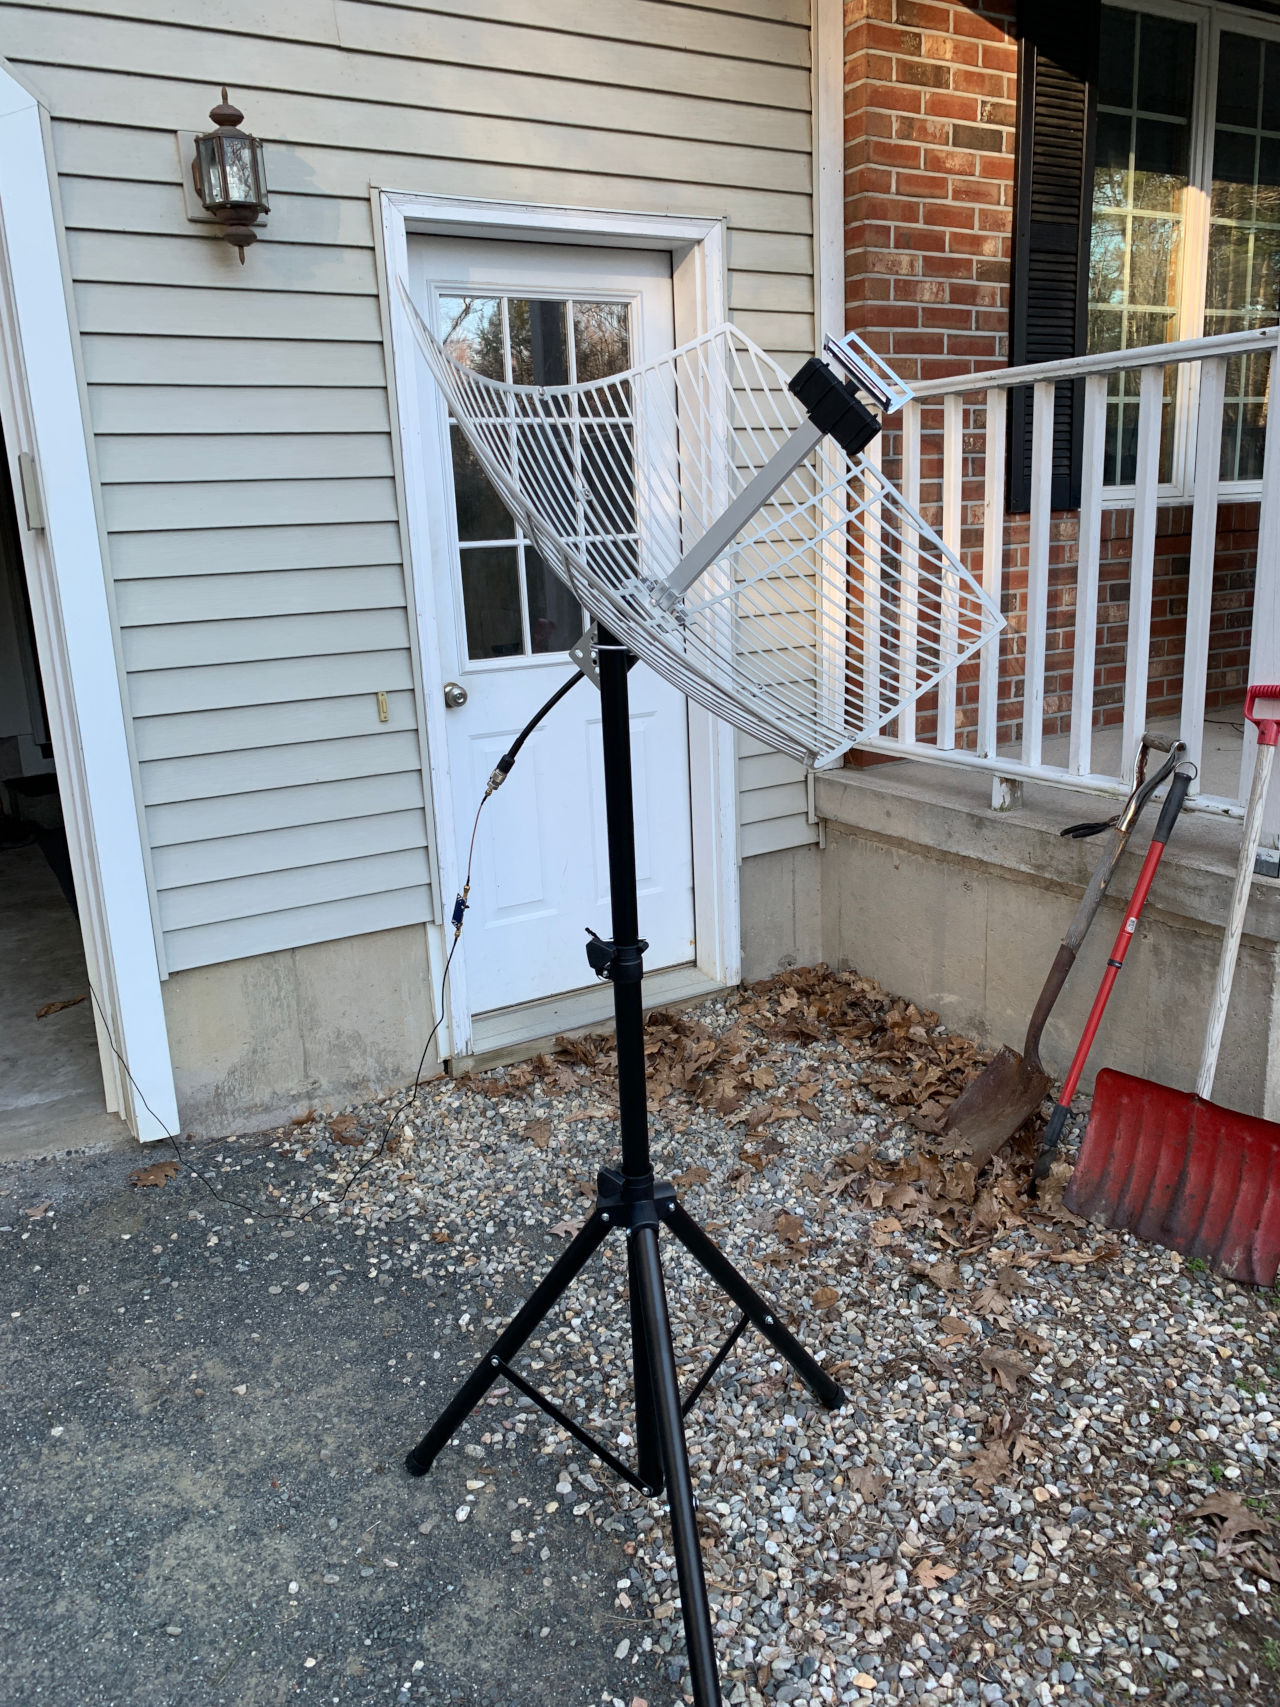 Photograph of a satellite dish mounted on a tripod pointing towards the sky.